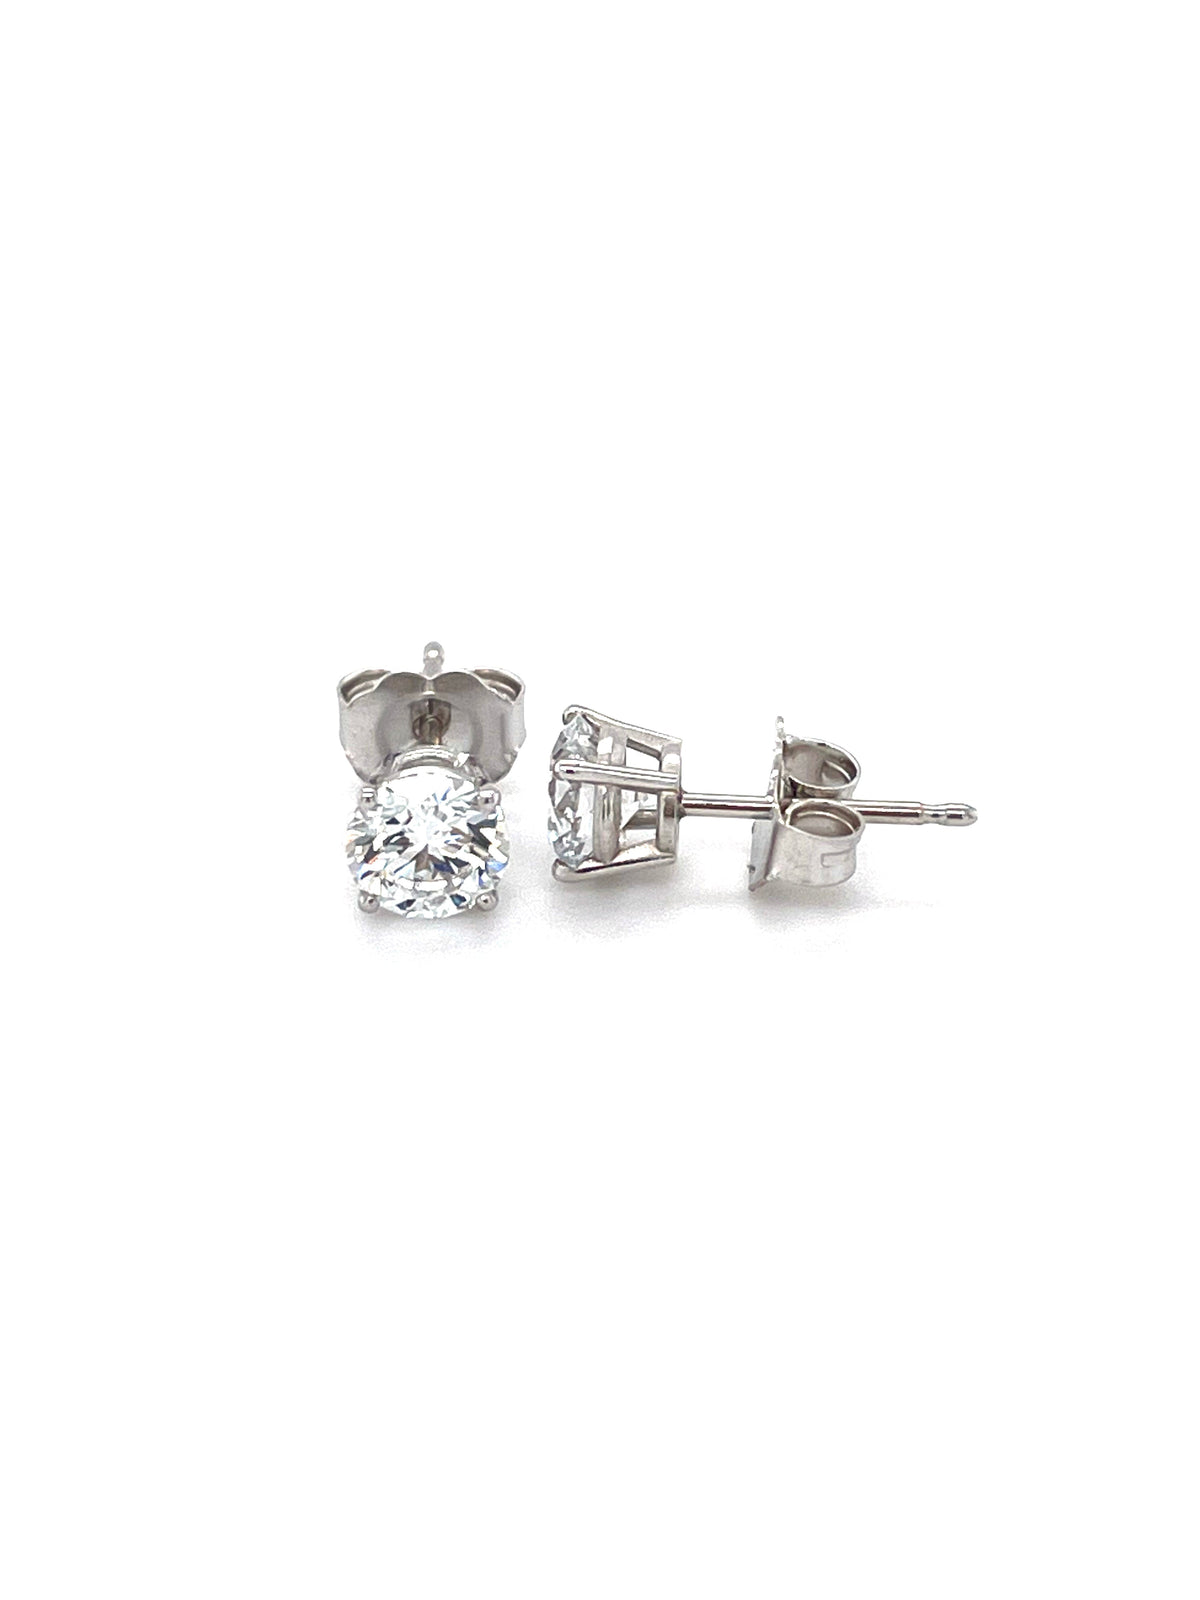 14K White Gold 1.05CT Lab Grown Diamond Solitaire Stud Earrings